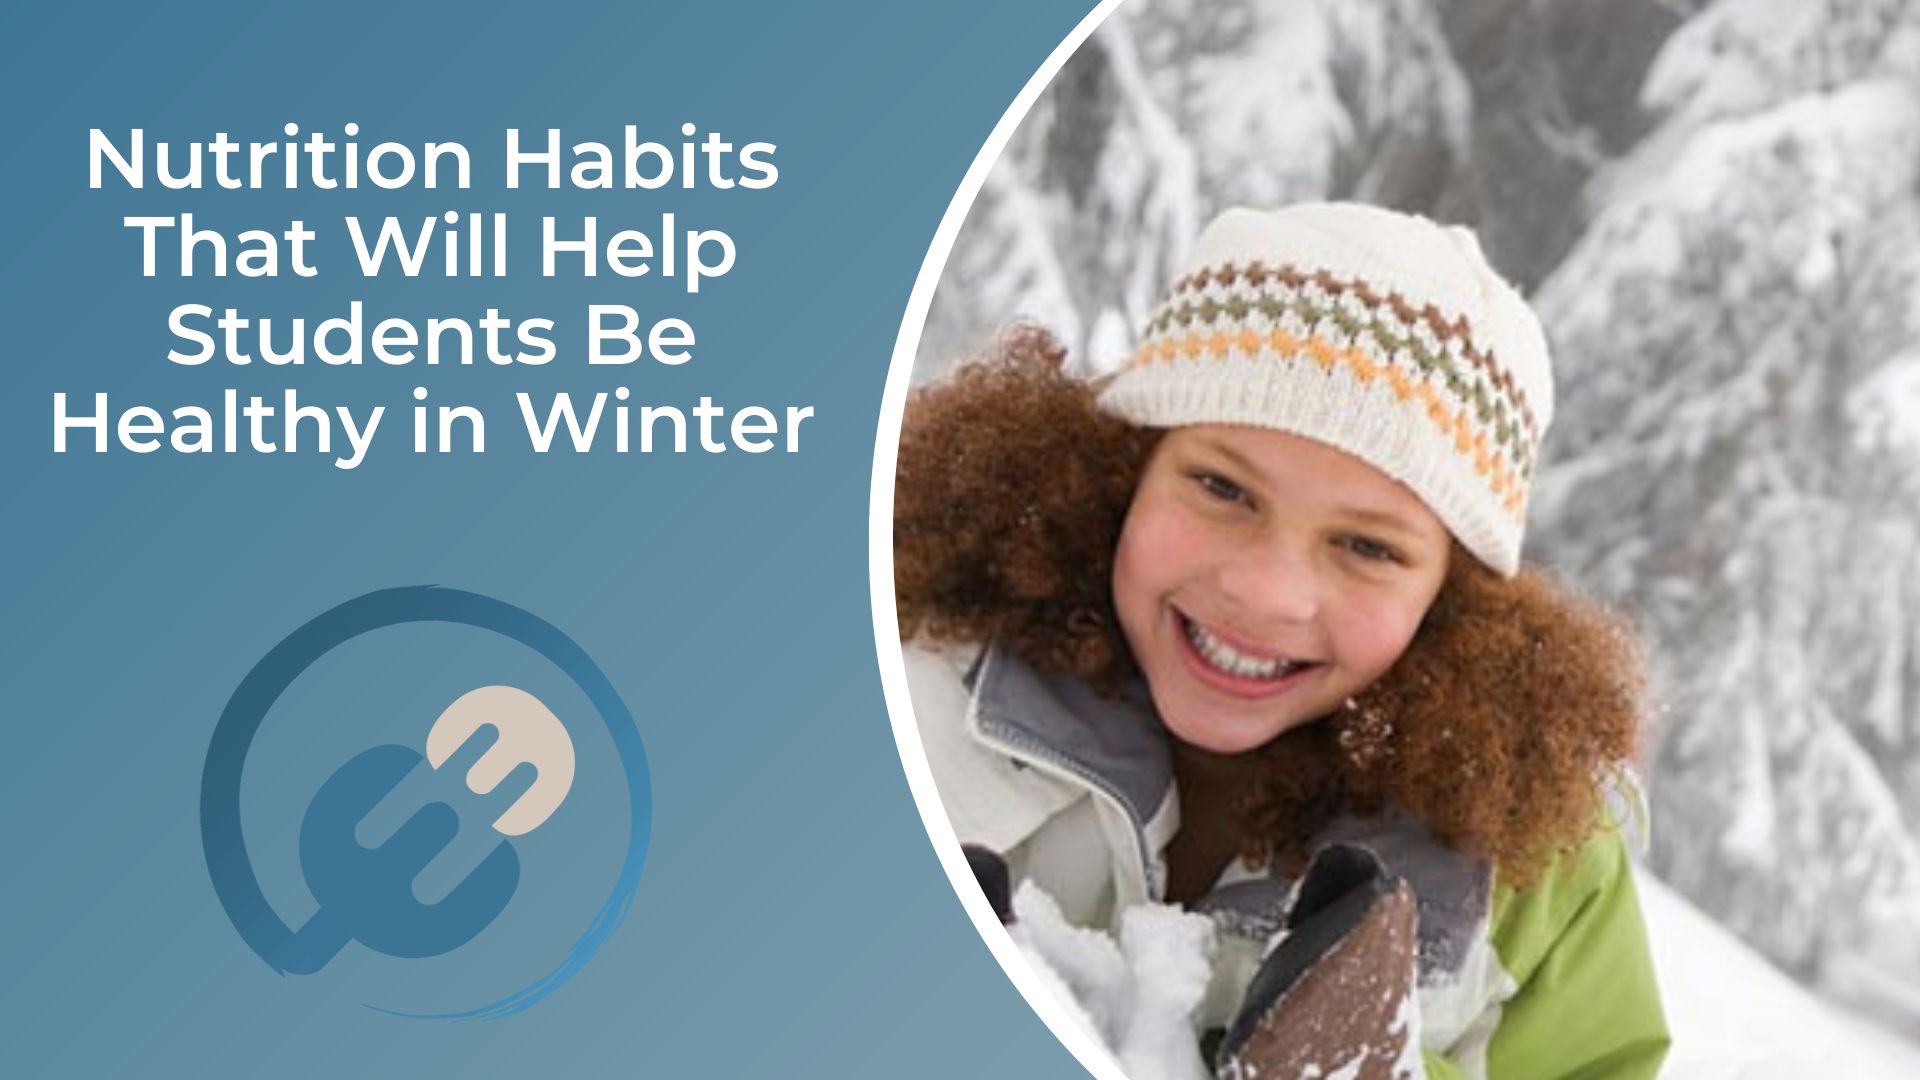 Nutrition Habits That Will Help Students Be Healthy in Winter